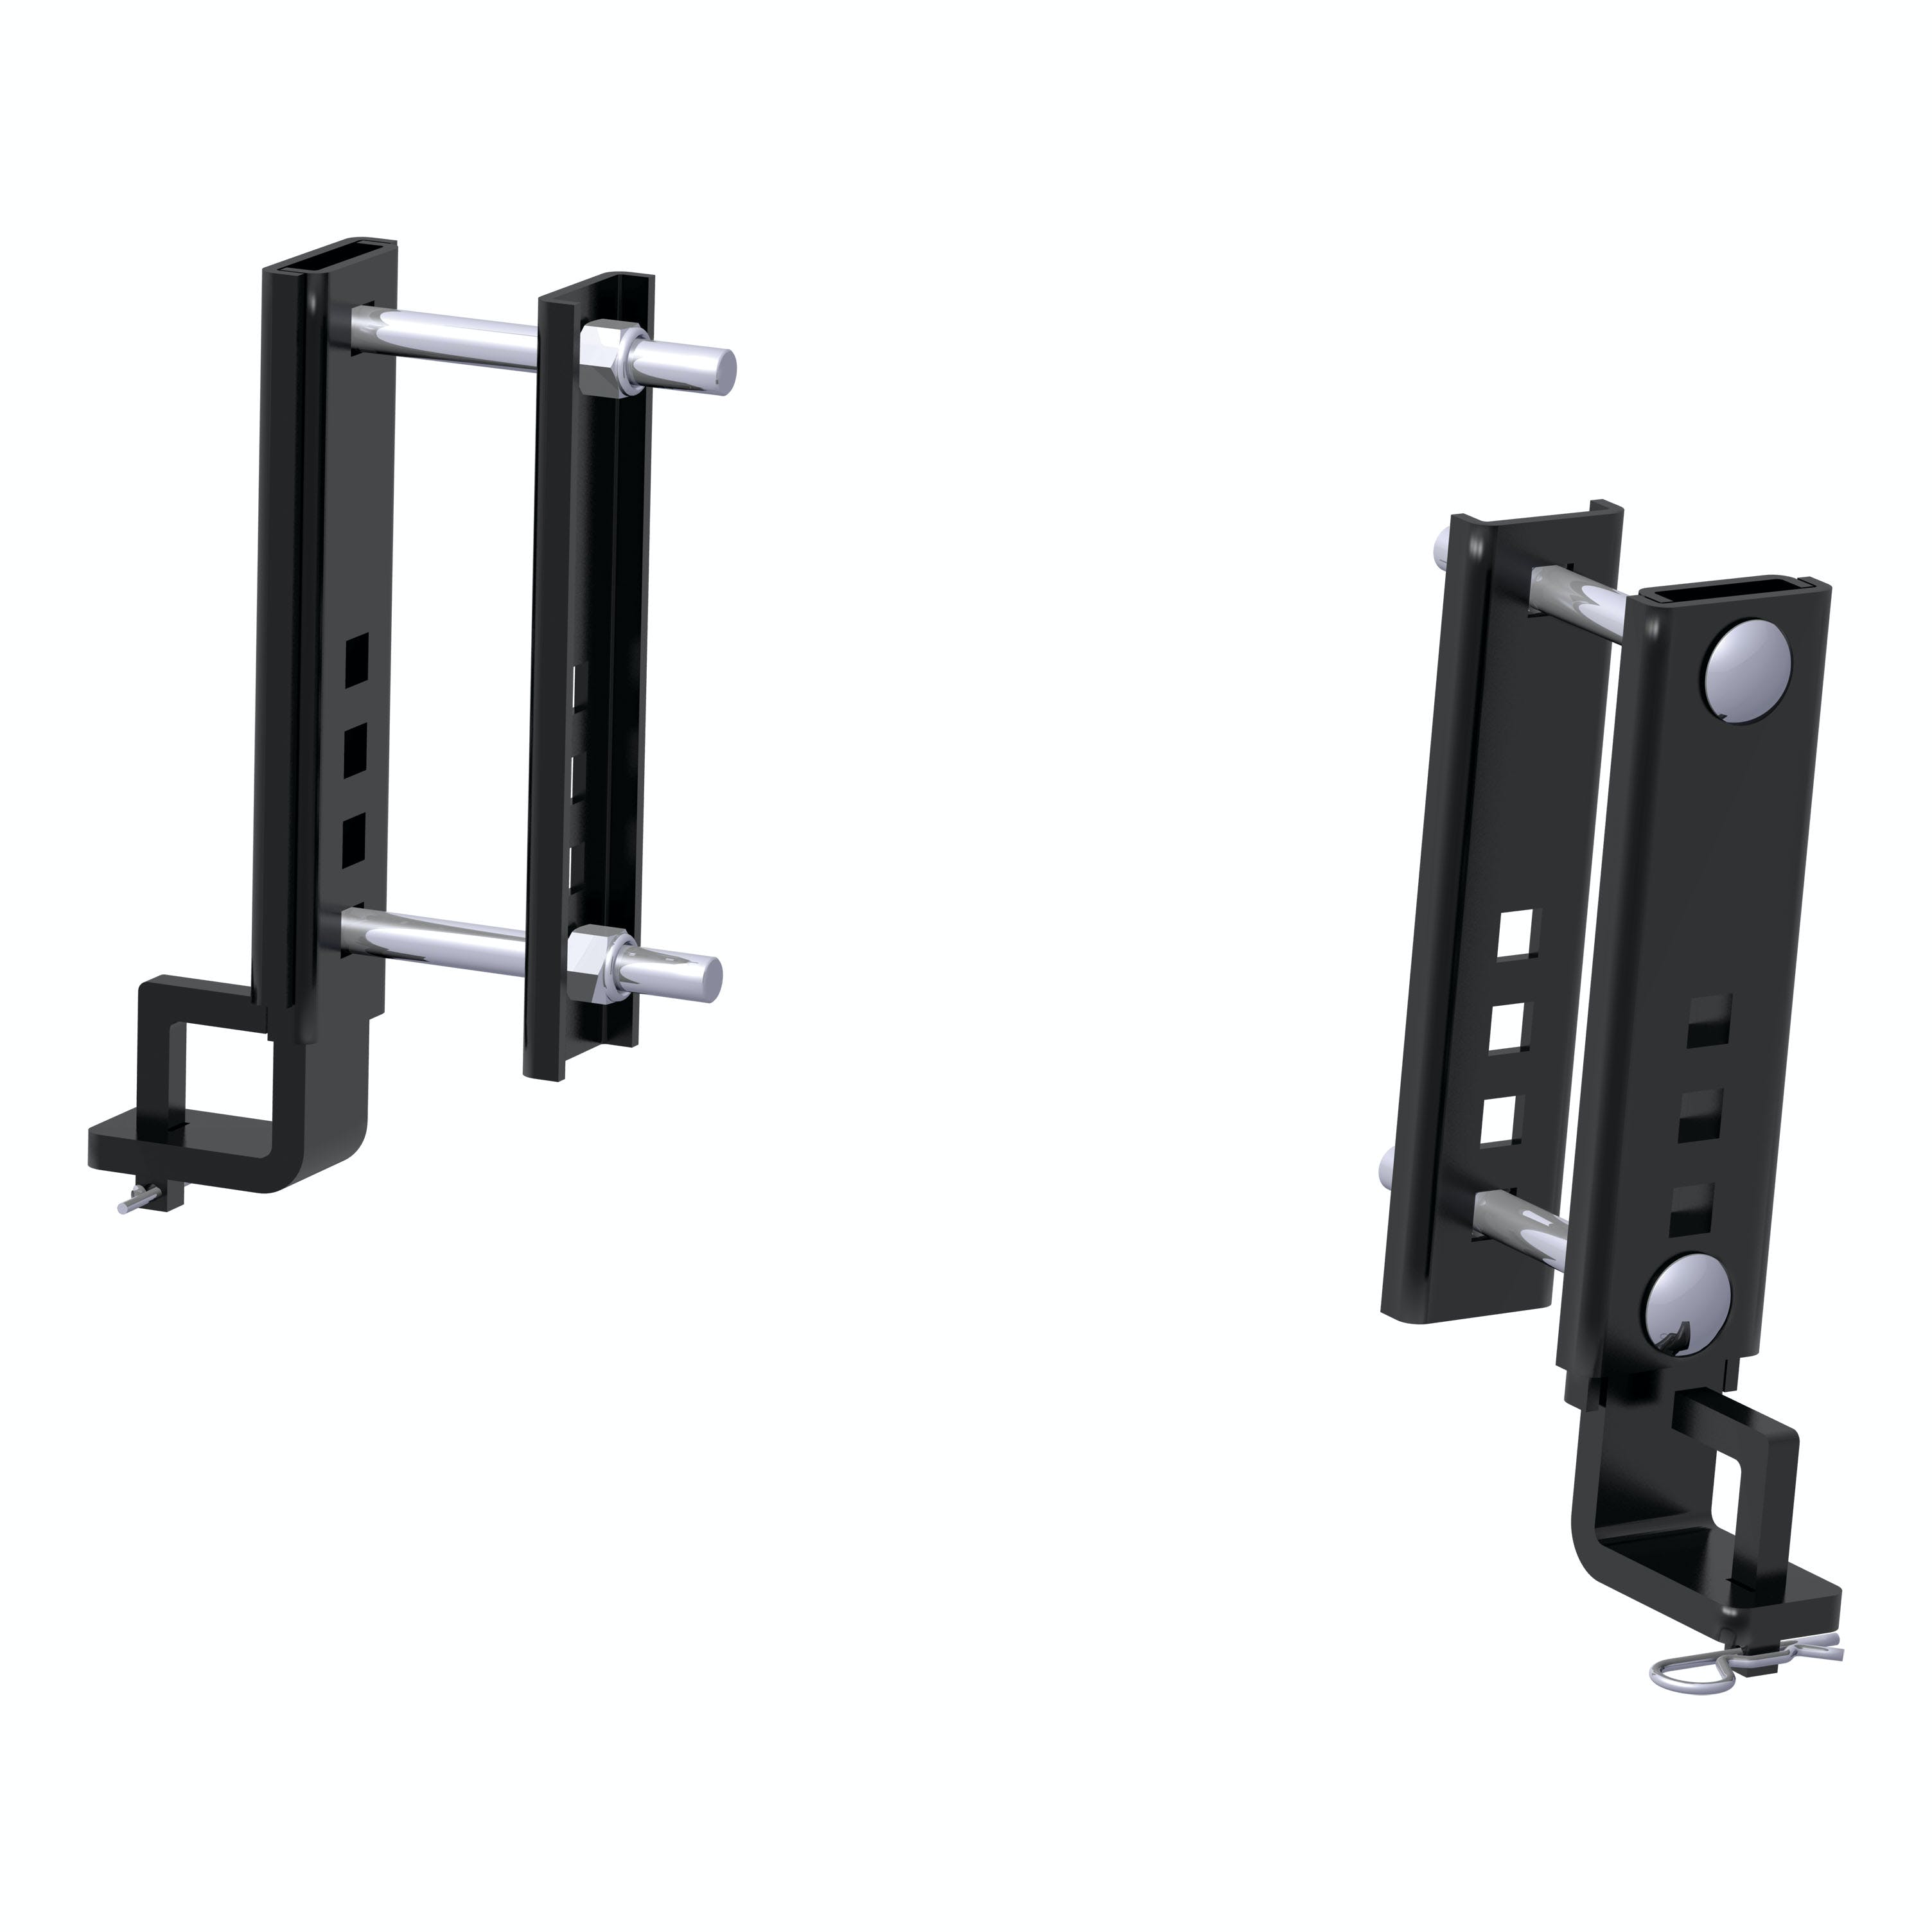 CURT 17508 Replacement TruTrack 6 Adjustable Support Brackets (2-Pack)